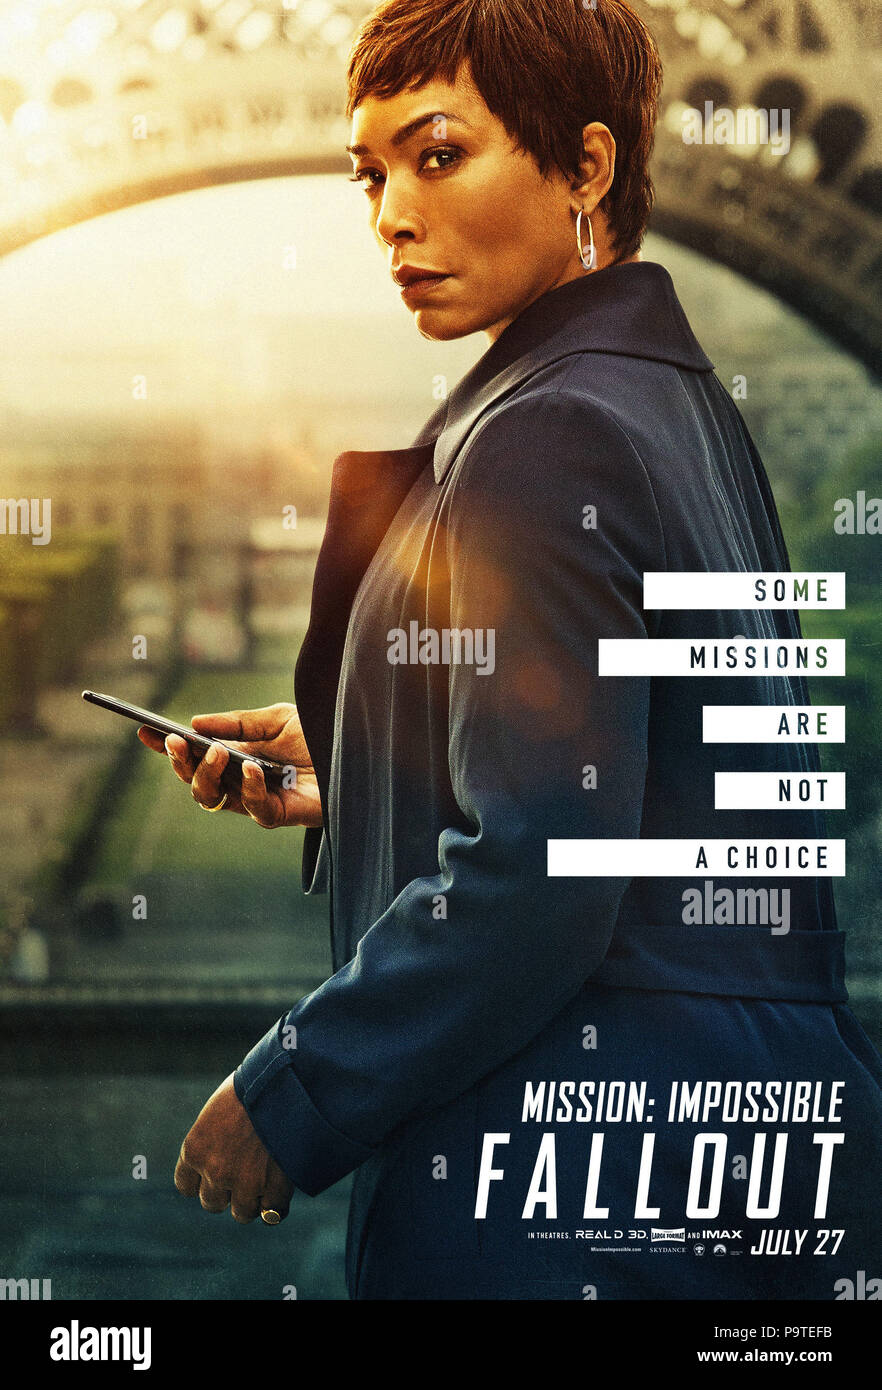 RELEASE DATE: July 27, 2018 TITLE: Mission: Impossible - Fallout STUDIO: Paramount Pictures DIRECTOR: Christopher McQuarrie PLOT: Ethan Hunt and his IMF team, along with some familiar allies, race against time after a mission gone wrong. STARRING: Poster art ANGELA BASSETT as Erika Sloane. (Credit Image: © Paramount Pictures/Entertainment Pictures) Stock Photo